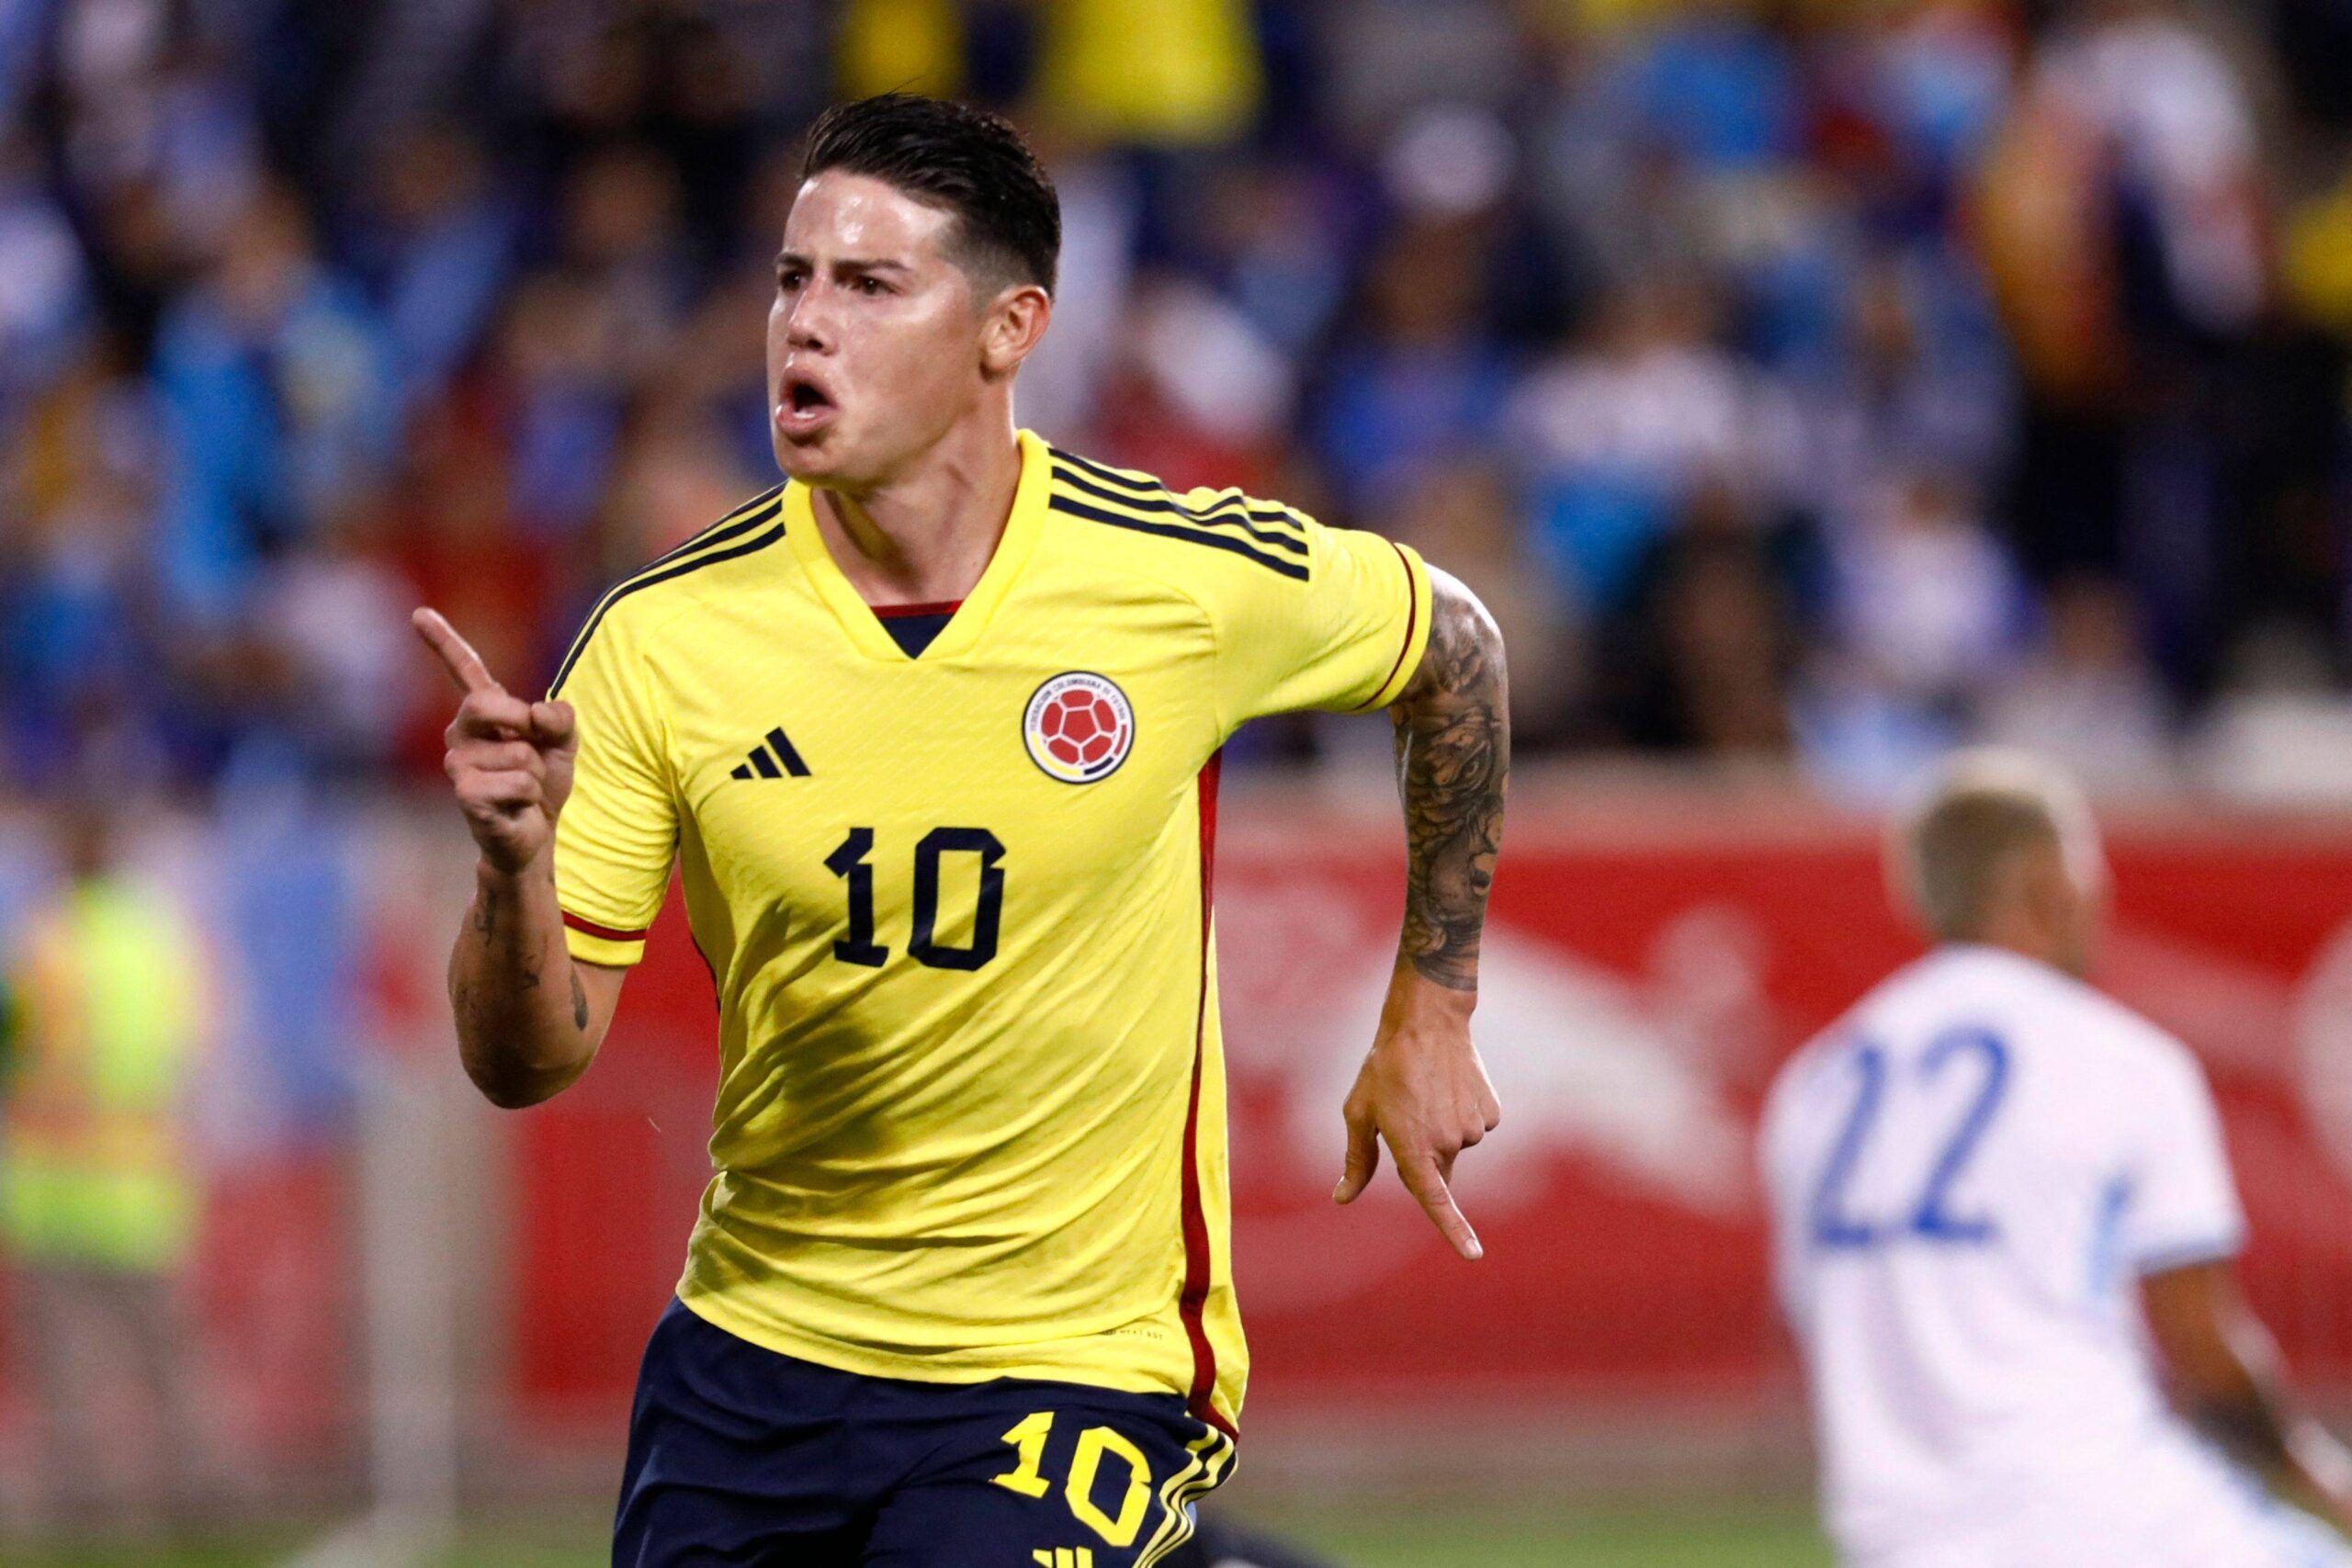 Profile of Copa América Teams: Colombia, Paraguay, and Costa Rica - Can James Rodríguez Lead Redemption?